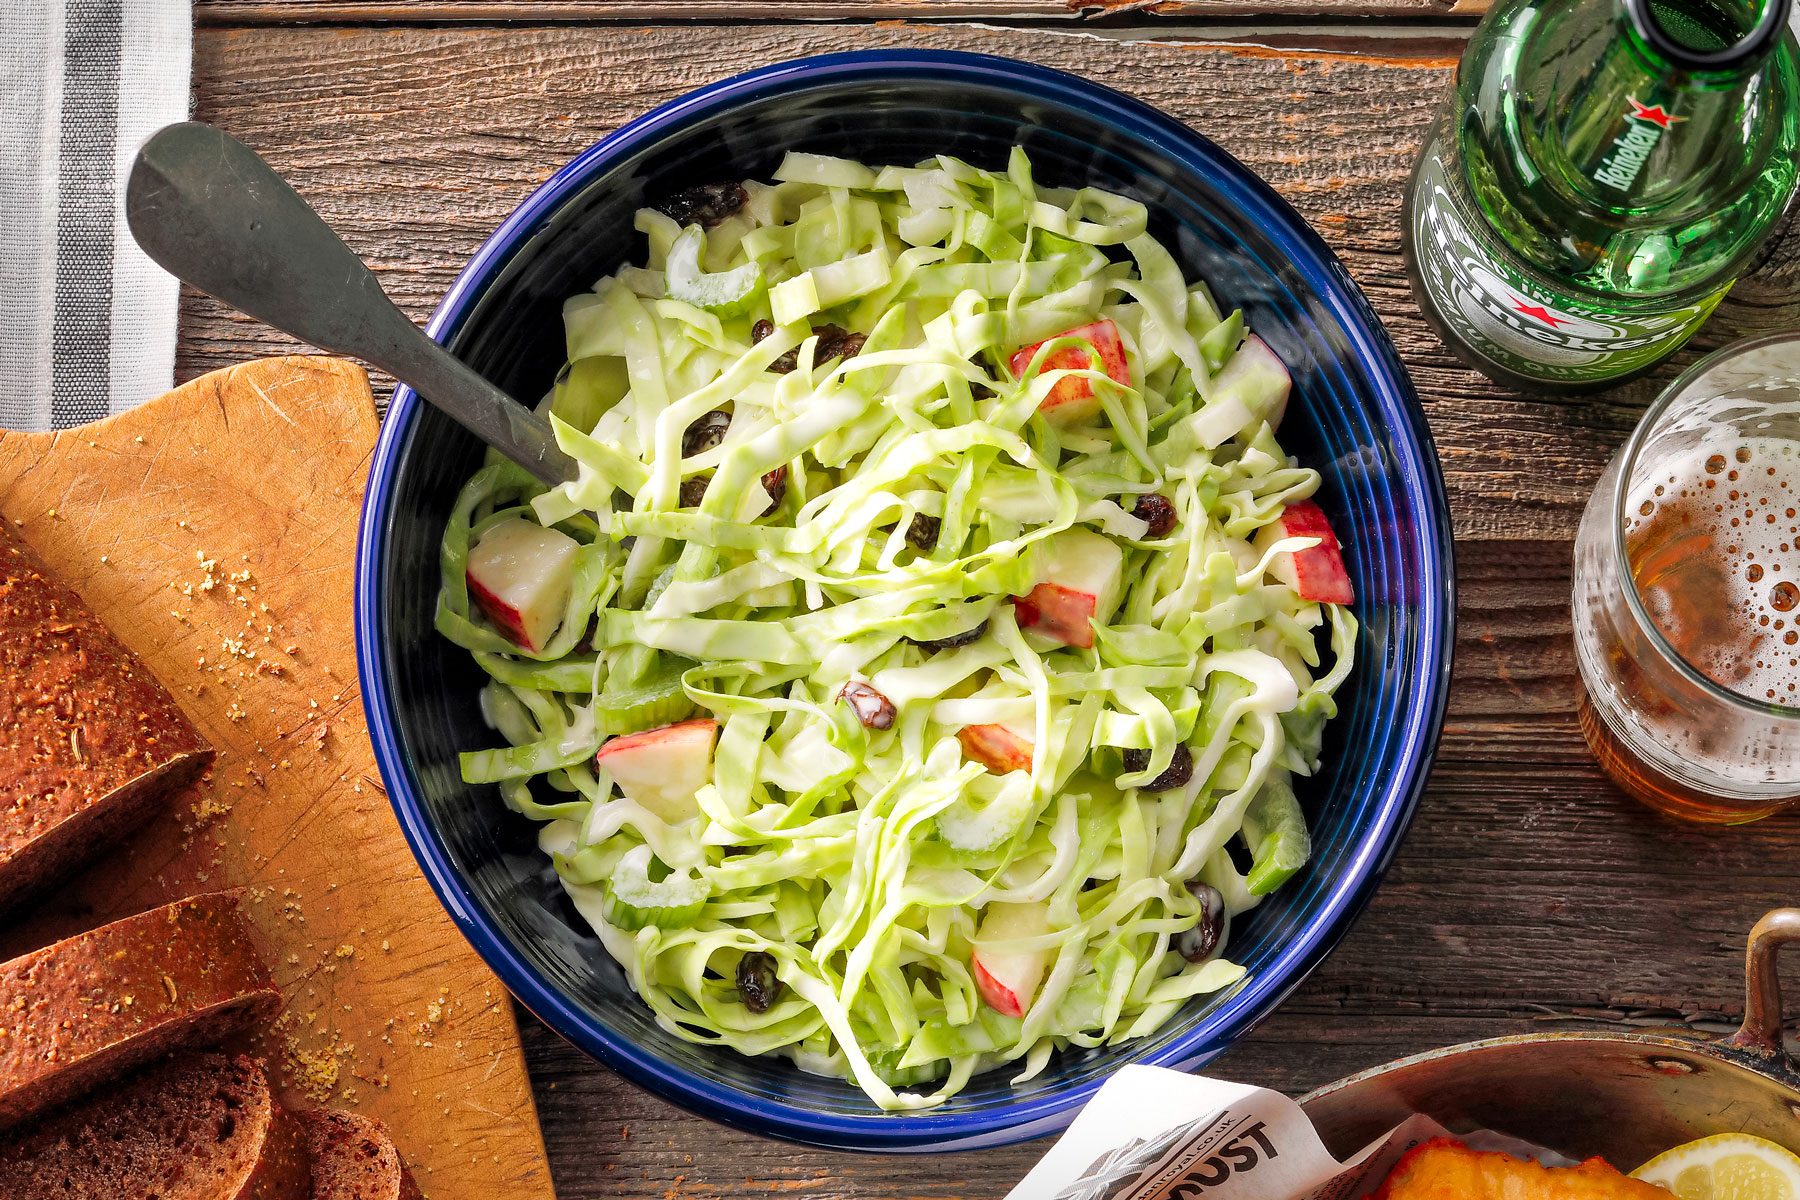 Apple Slaw in a Ceramic Blue Bowl on Wooden Surface